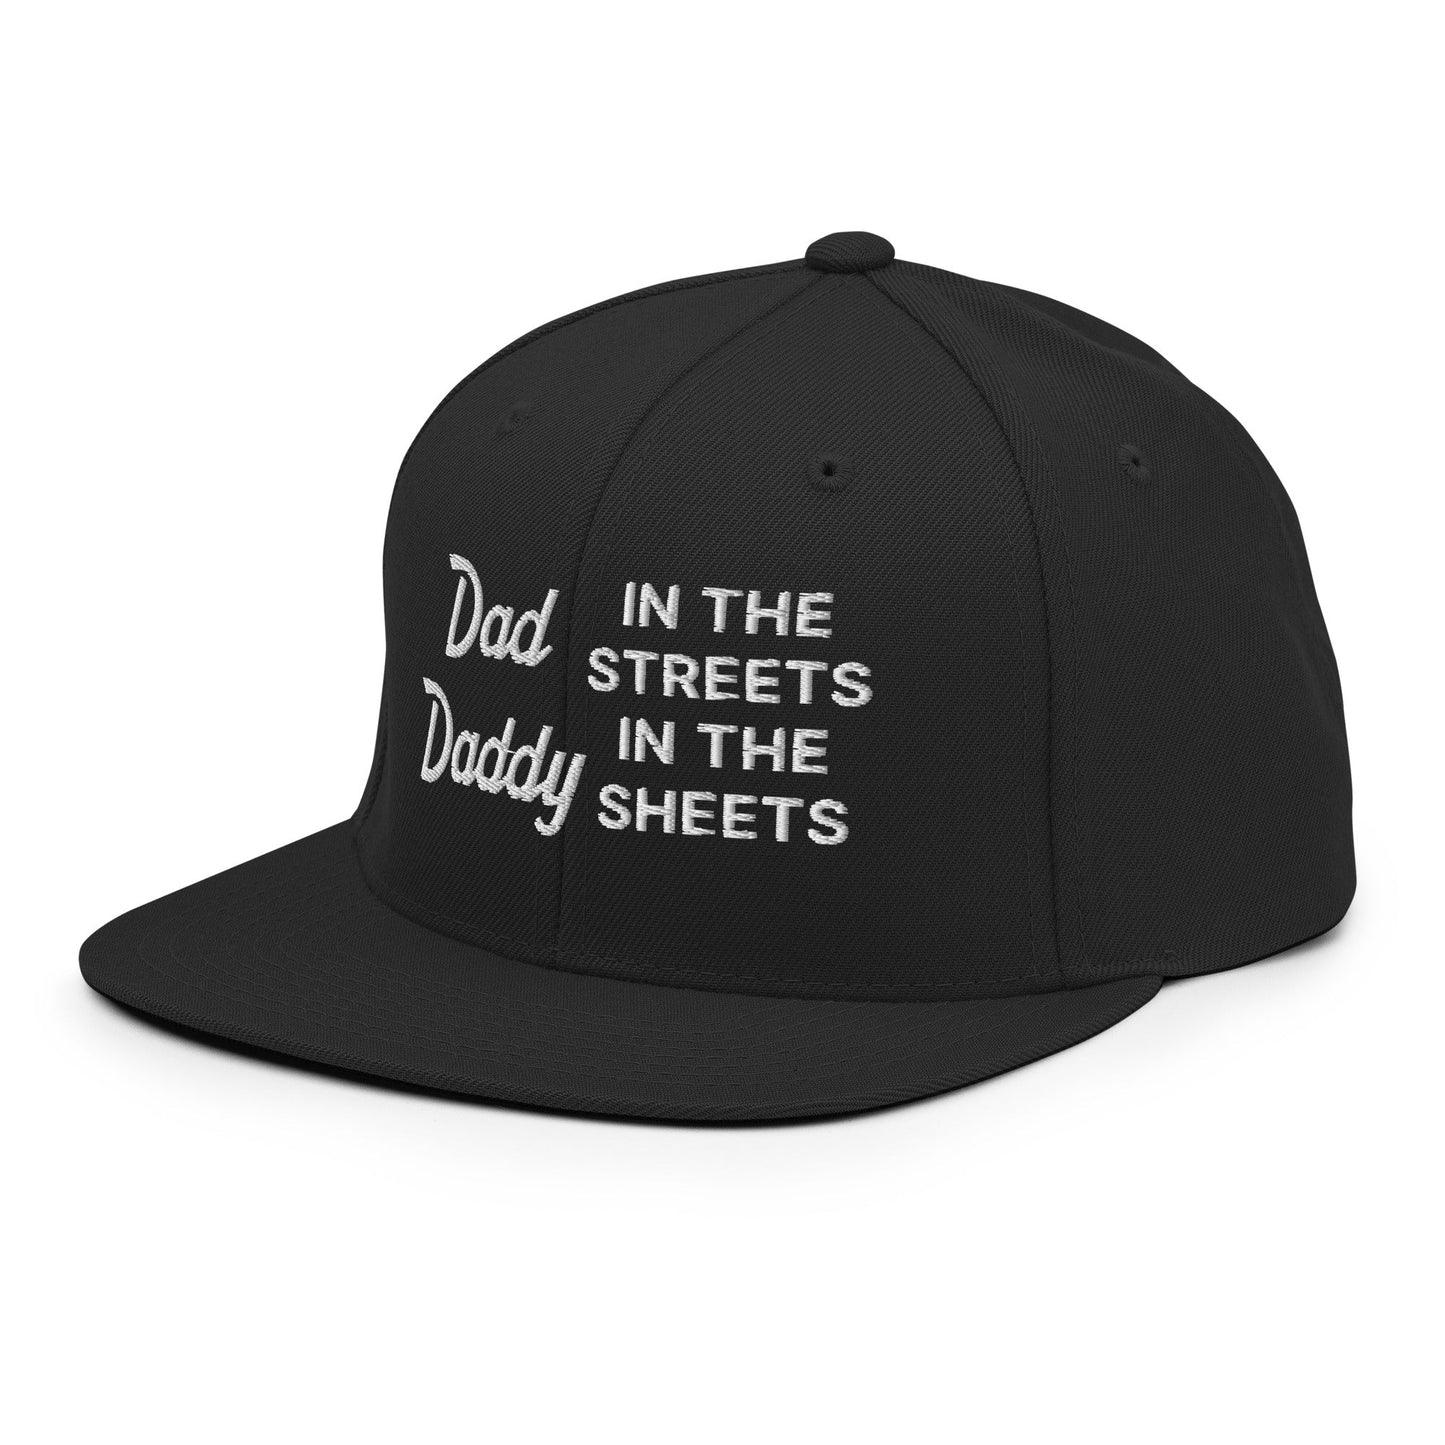 Dad In The Streets Daddy In The Sheets Snapback Hat Black